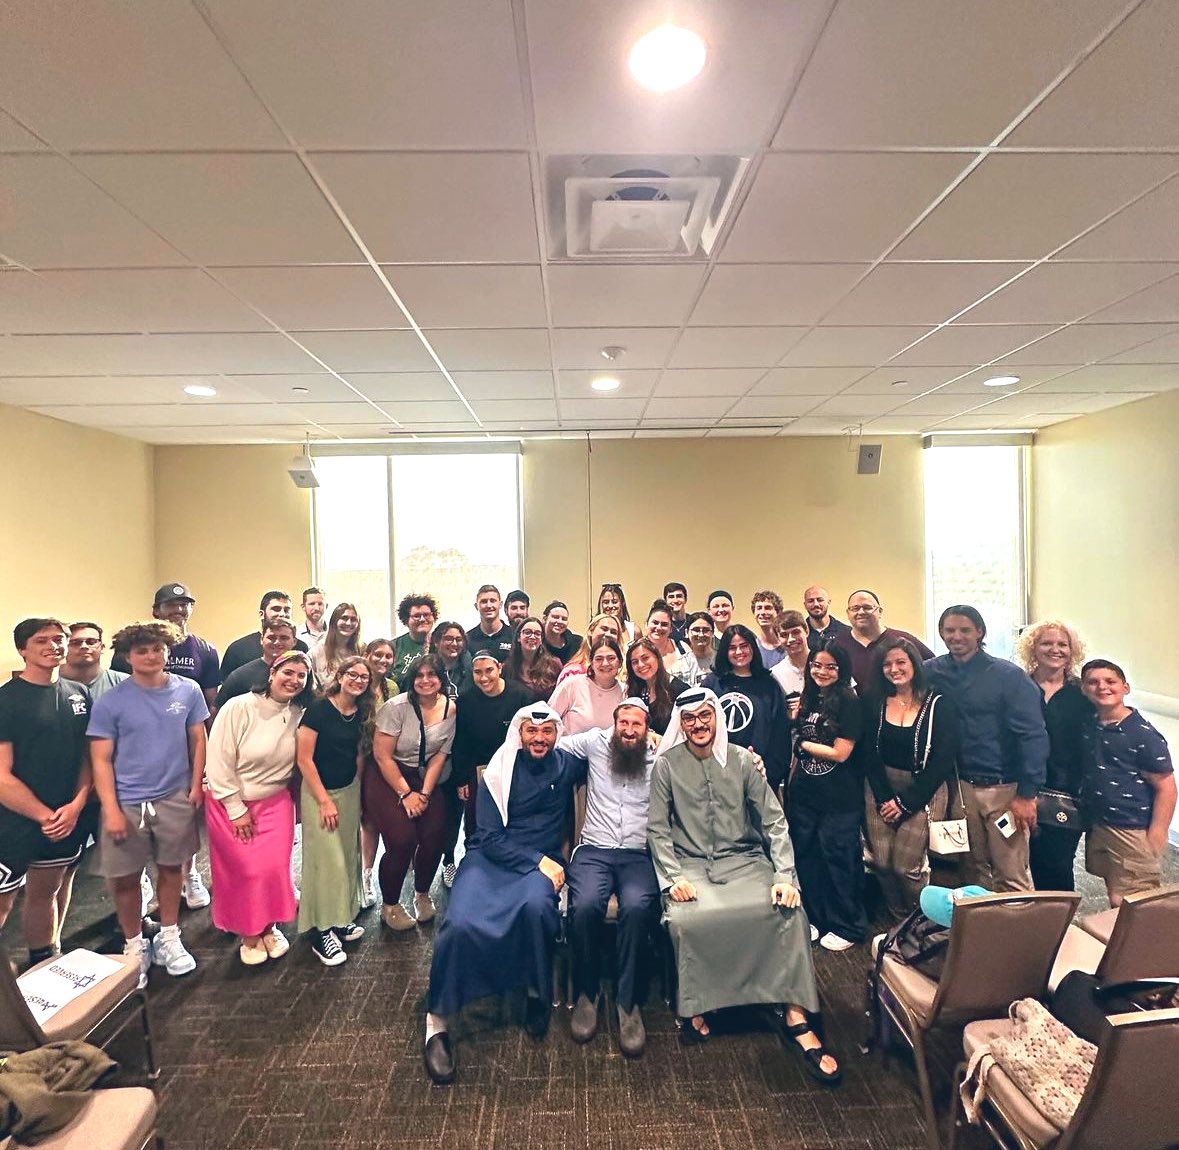 May you all have a blessed Friday and Shabbat Shalom 🙏🏼✡️☪️ We spoke at the University of South Florida, continued to give American students hope, and answered all their questions about the future of our region. We are the real voices from the Middle East that represent its